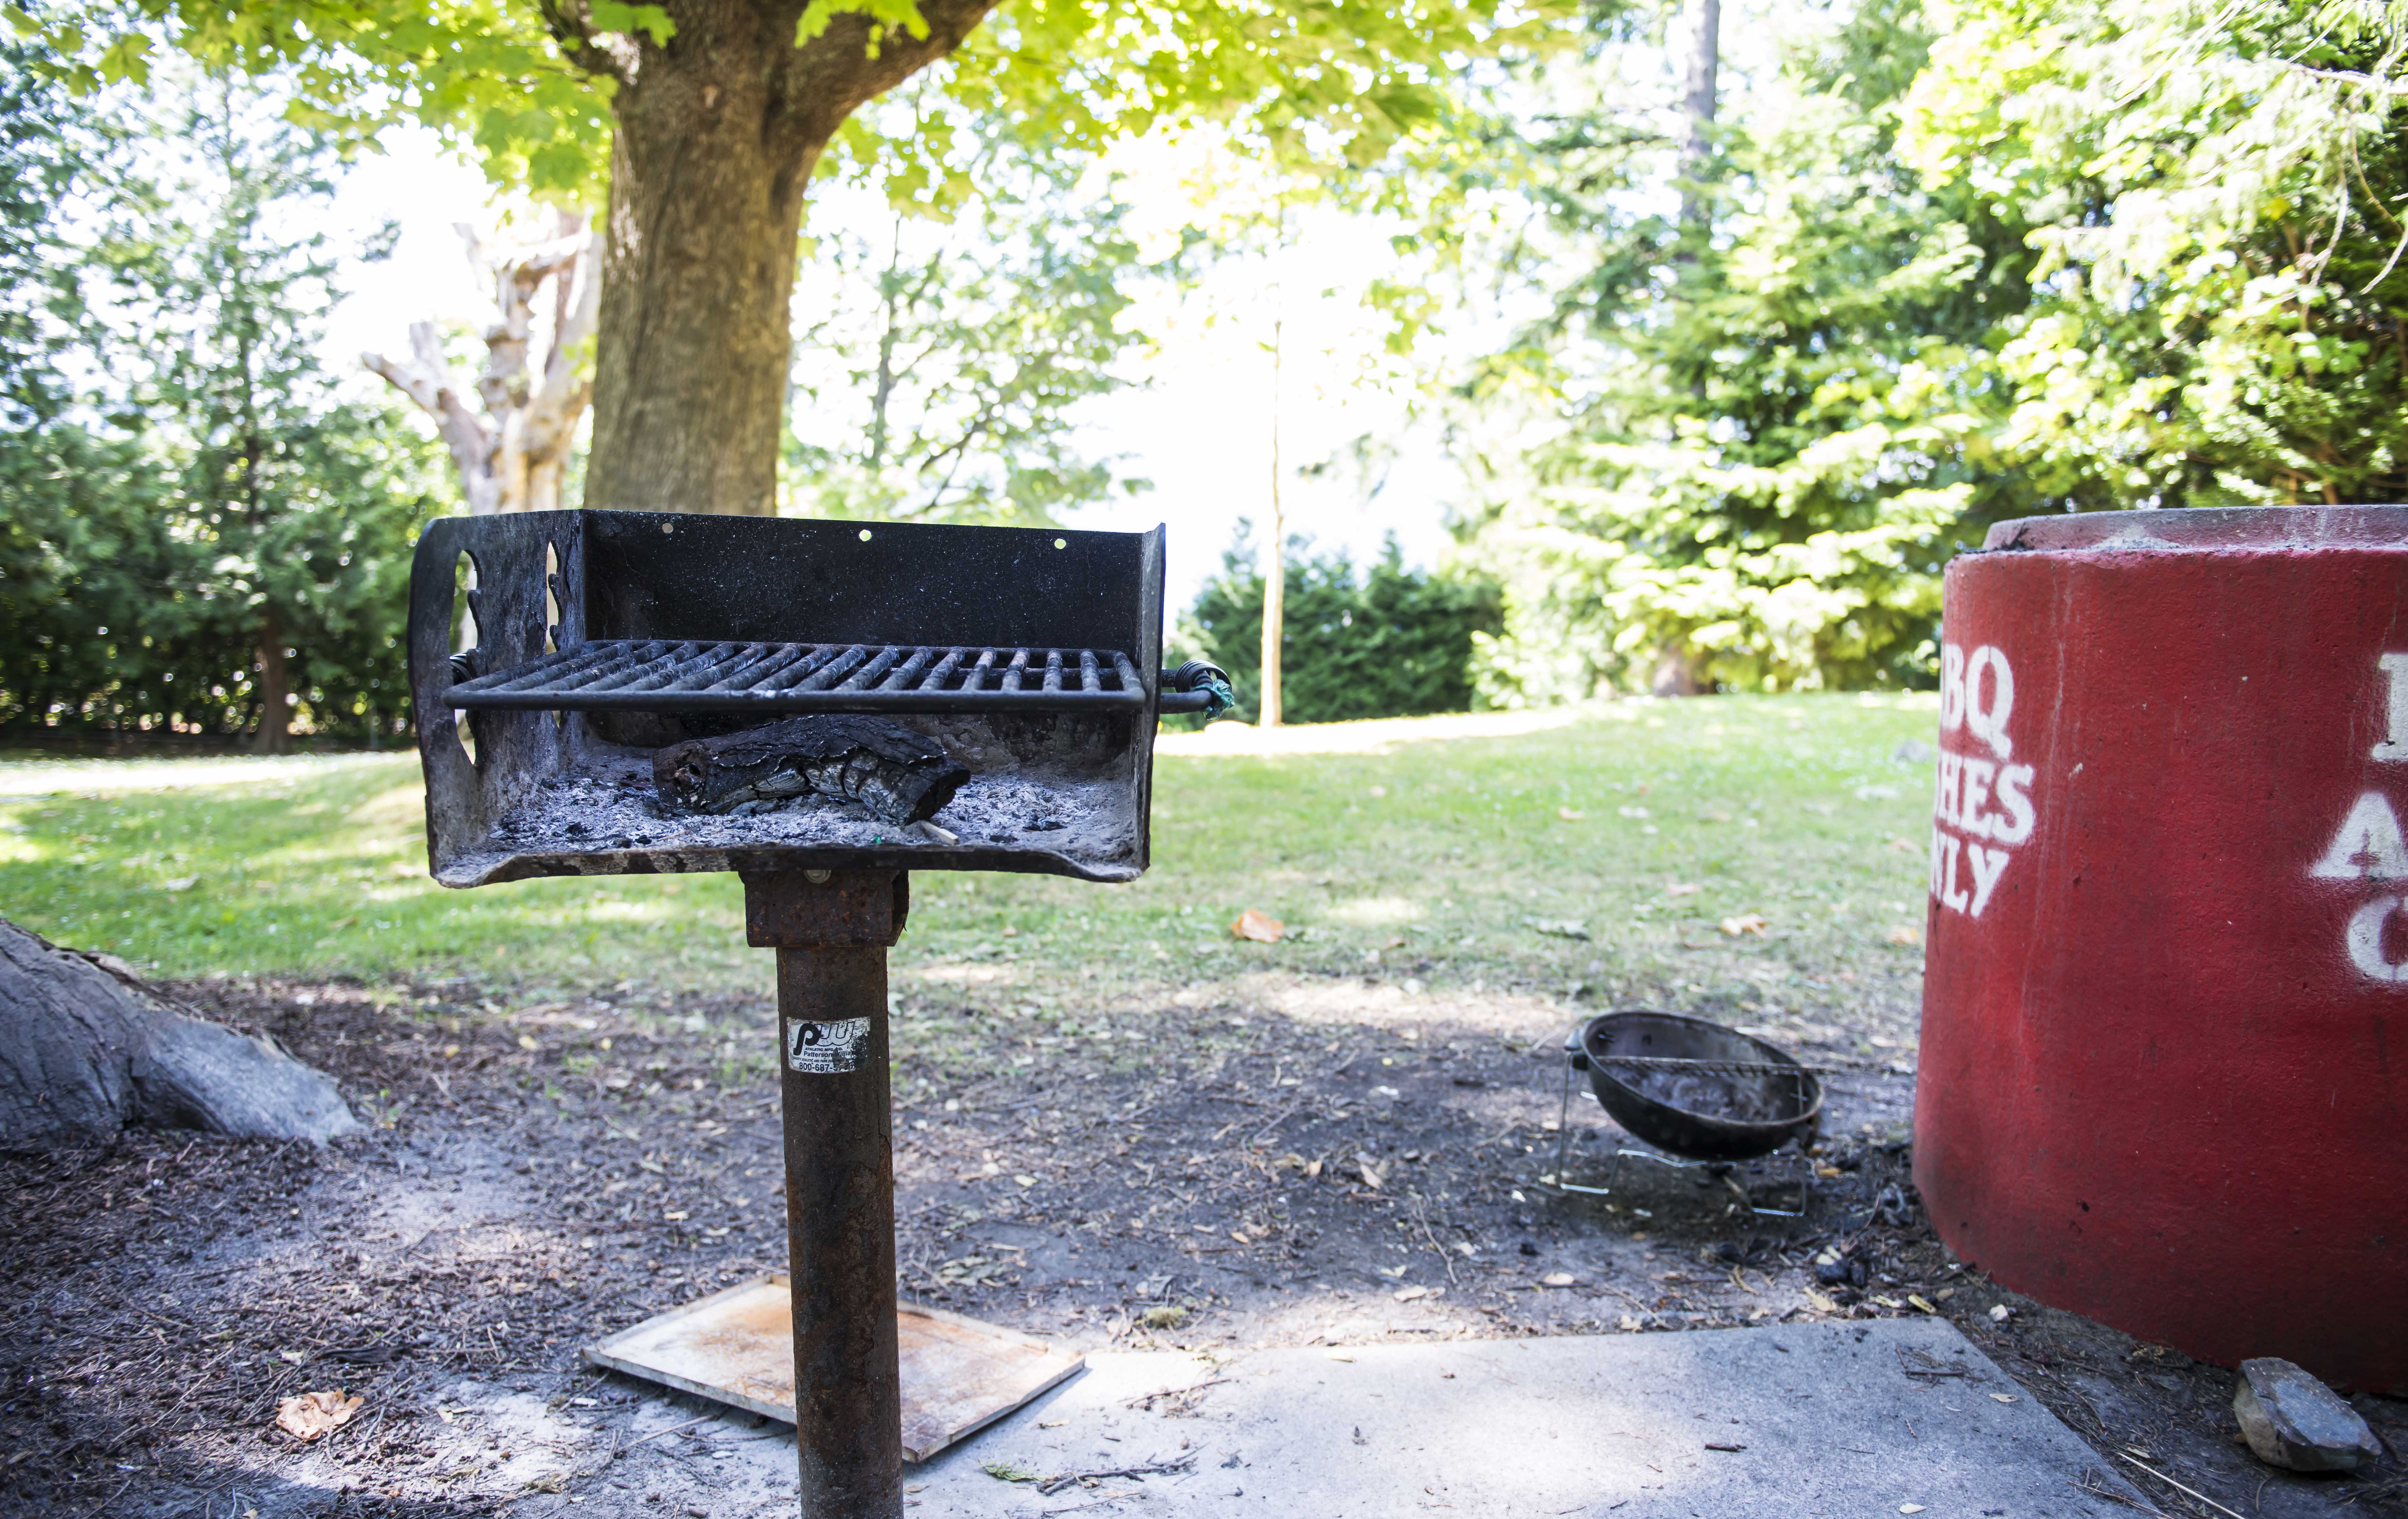 Barbecues And Fire Restrictions, Park Fire Pits